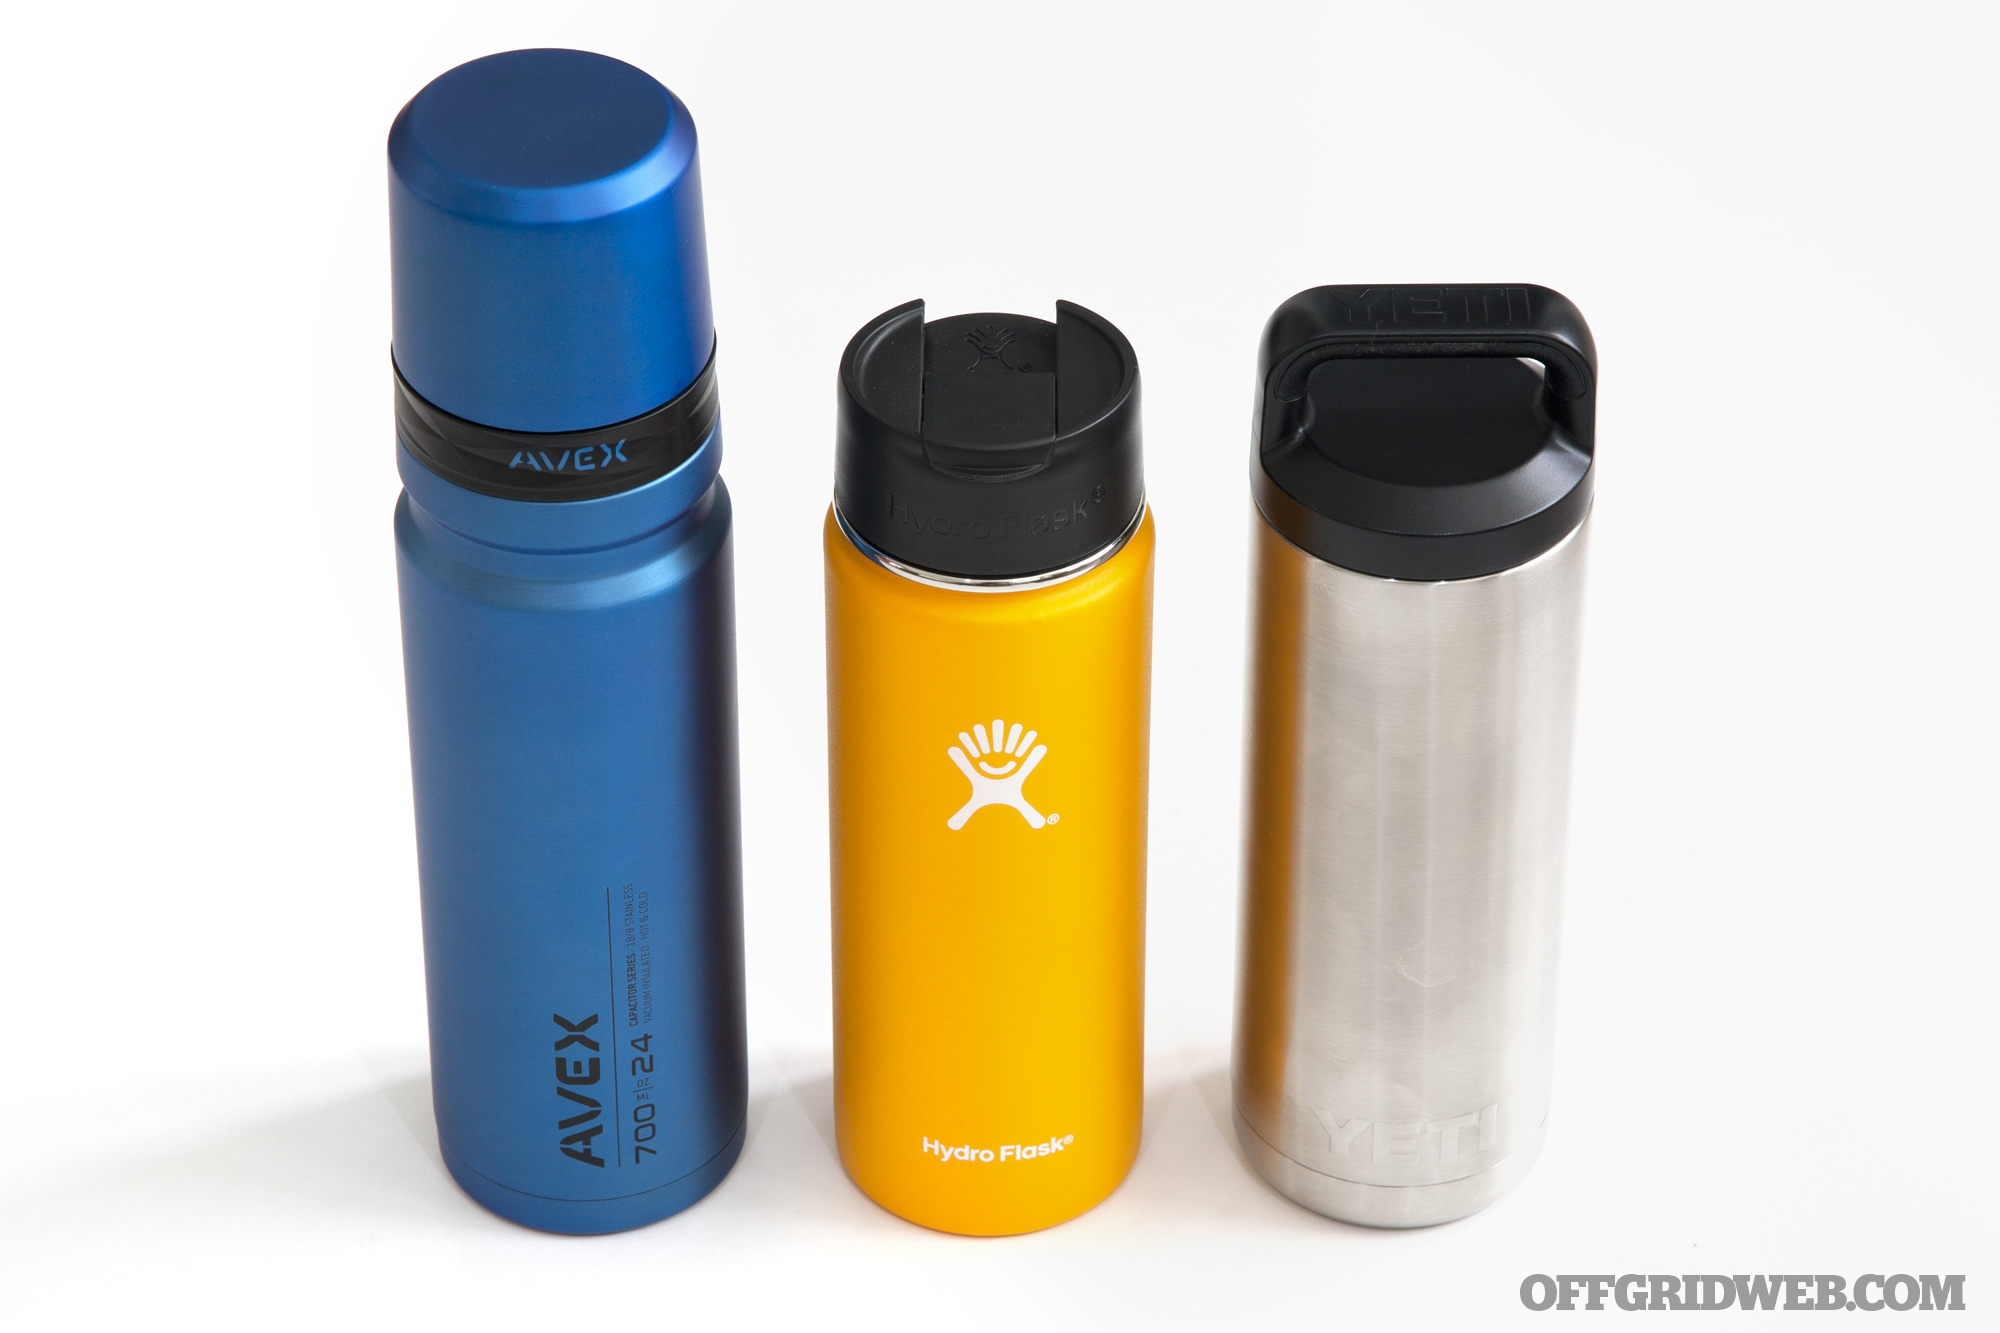 Insulated bottles: Super Sparrow vs Hydro Flask… how do they compare? –  Call Me Mochelle